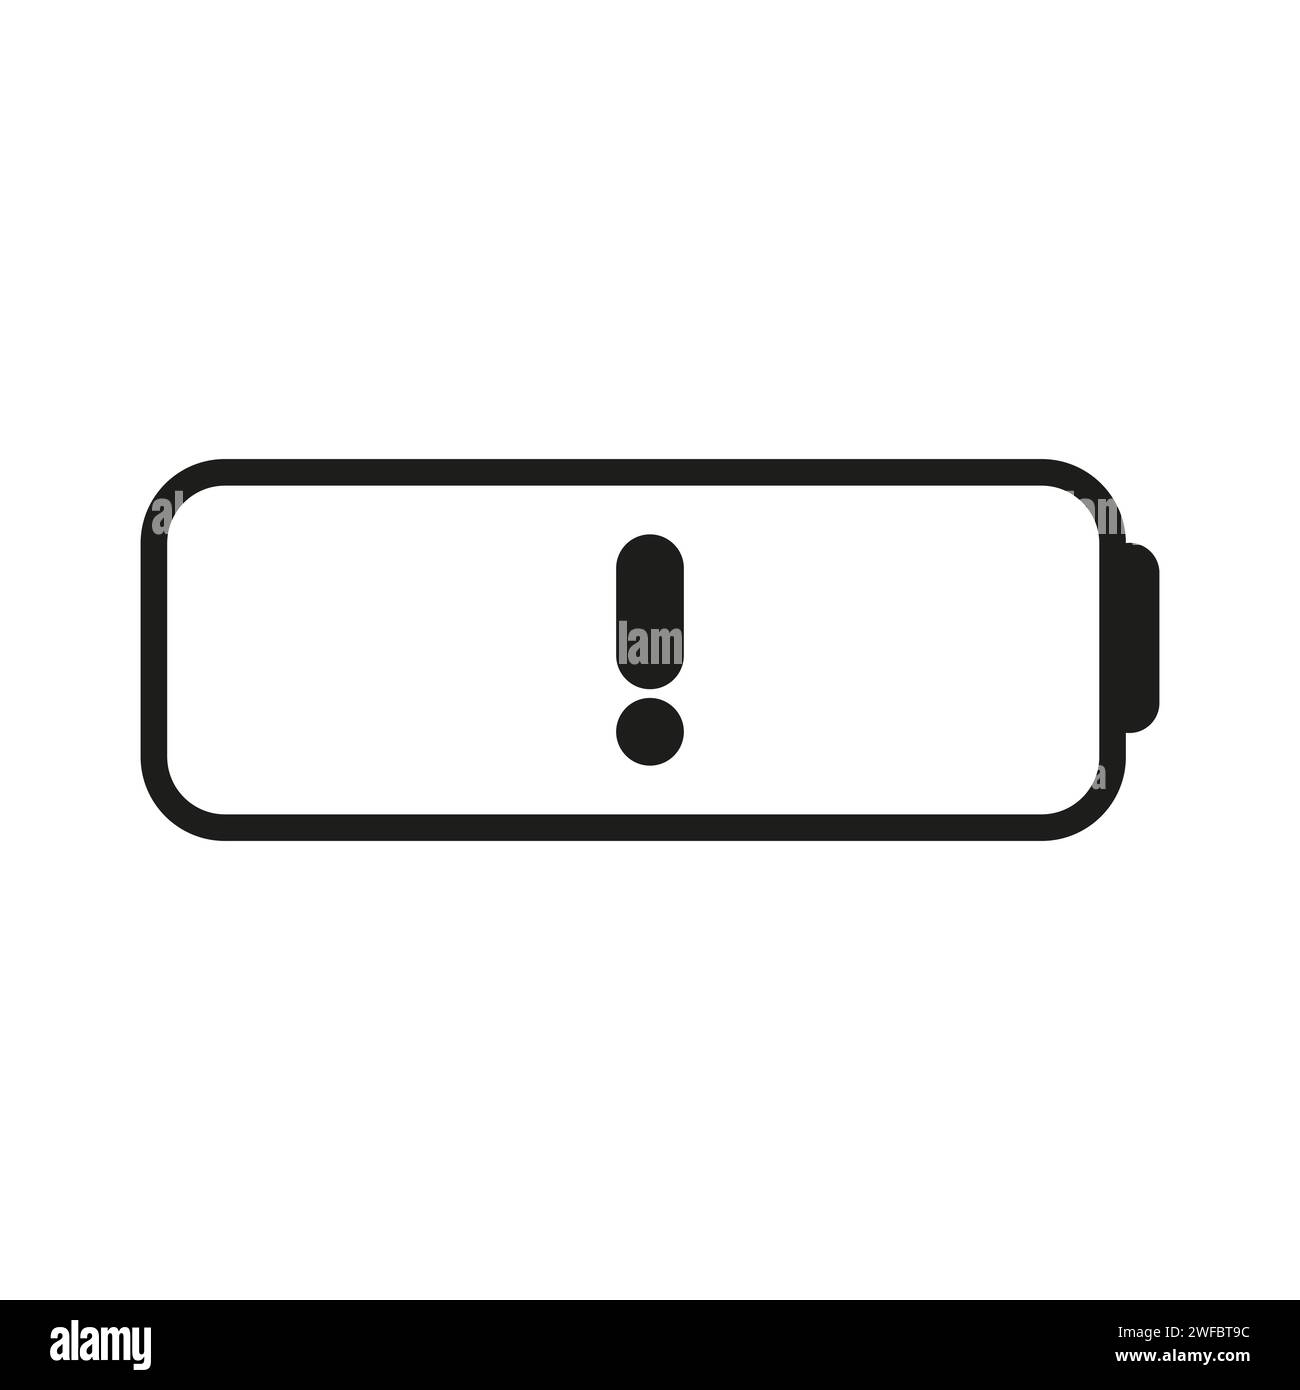 Battery charge icon. Exclamation point. Communication concept. Cell phone. Flat design. Vector illustration. Stock image. EPS 10. Stock Vector